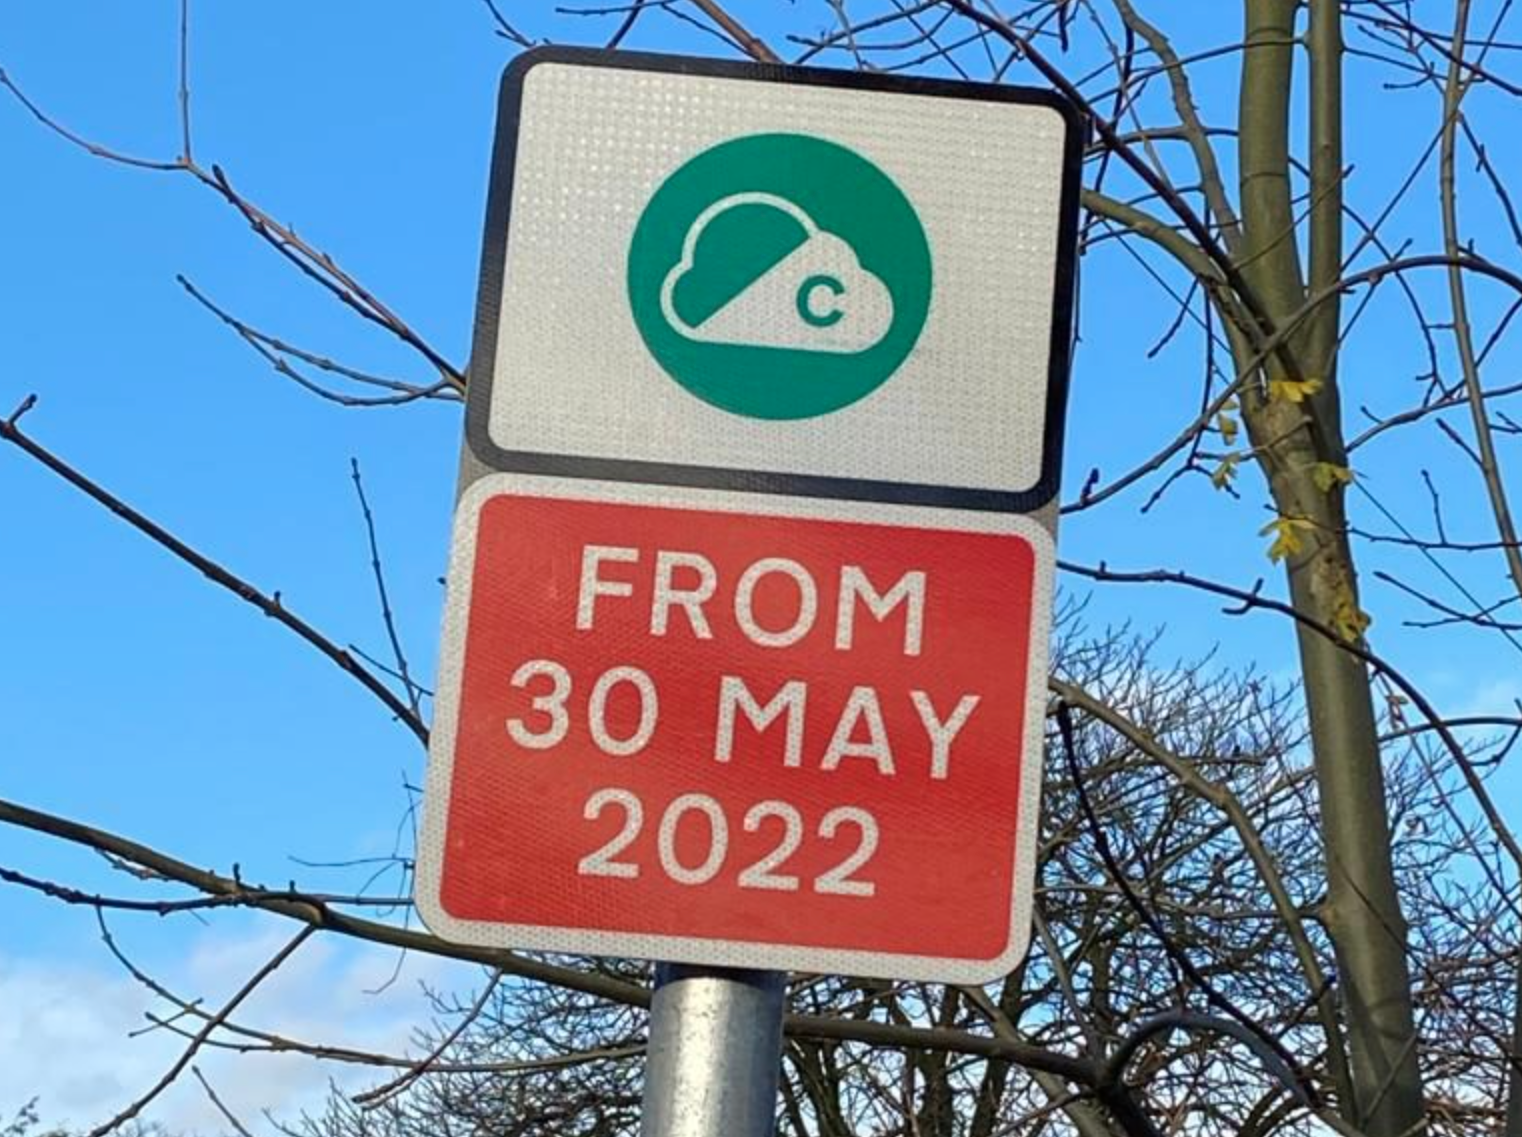 Cost of stickers to cover up Greater Manchester&#8217;s Clean Air Zone signs revealed &#8211; and it&#8217;s big, The Manc